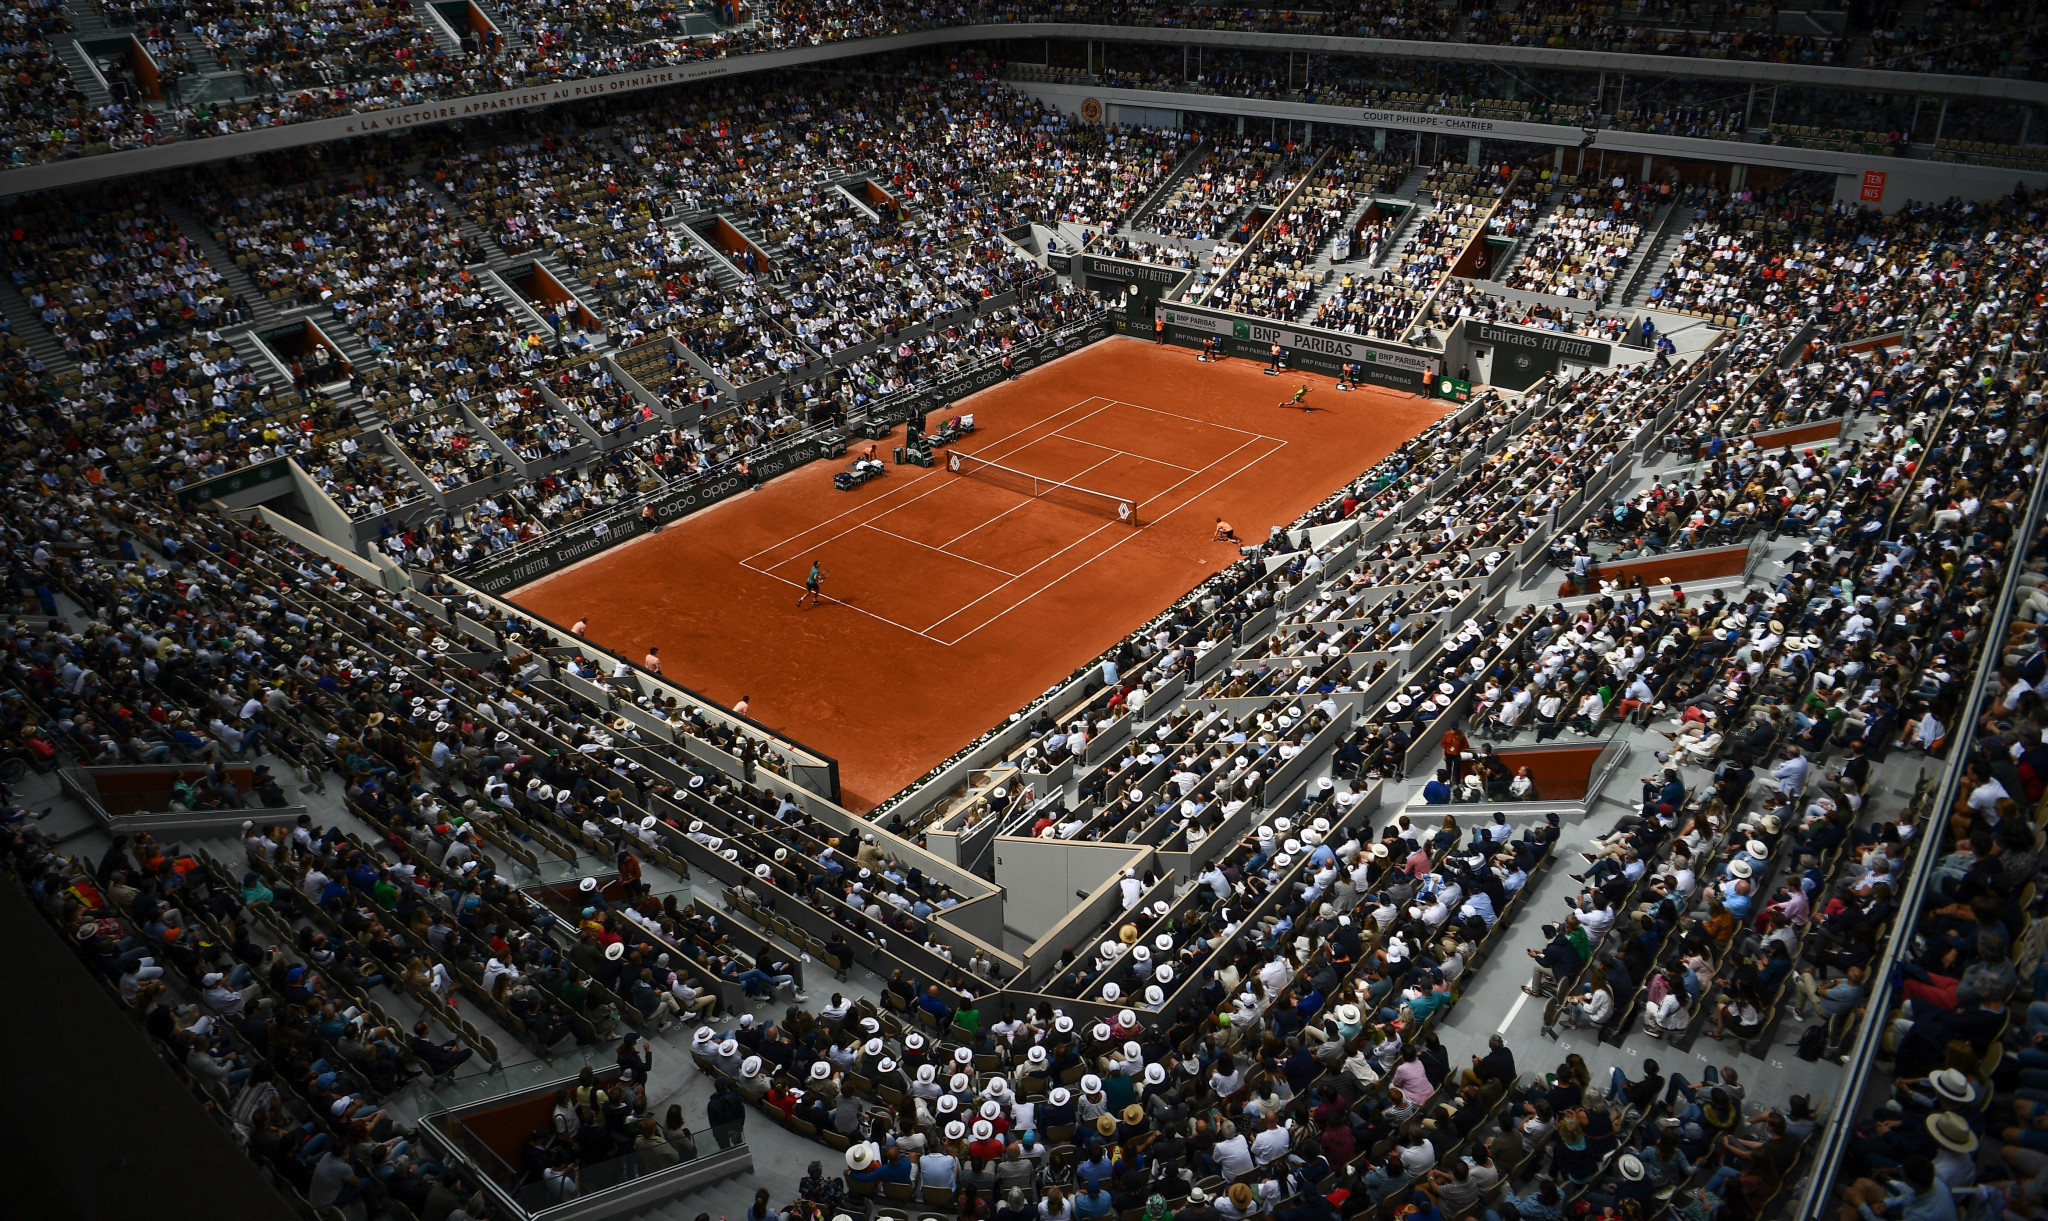 The 2022 French Open concluded on Sunday with Wimbledon set to be the next Grand Slam stop ©Getty Images
